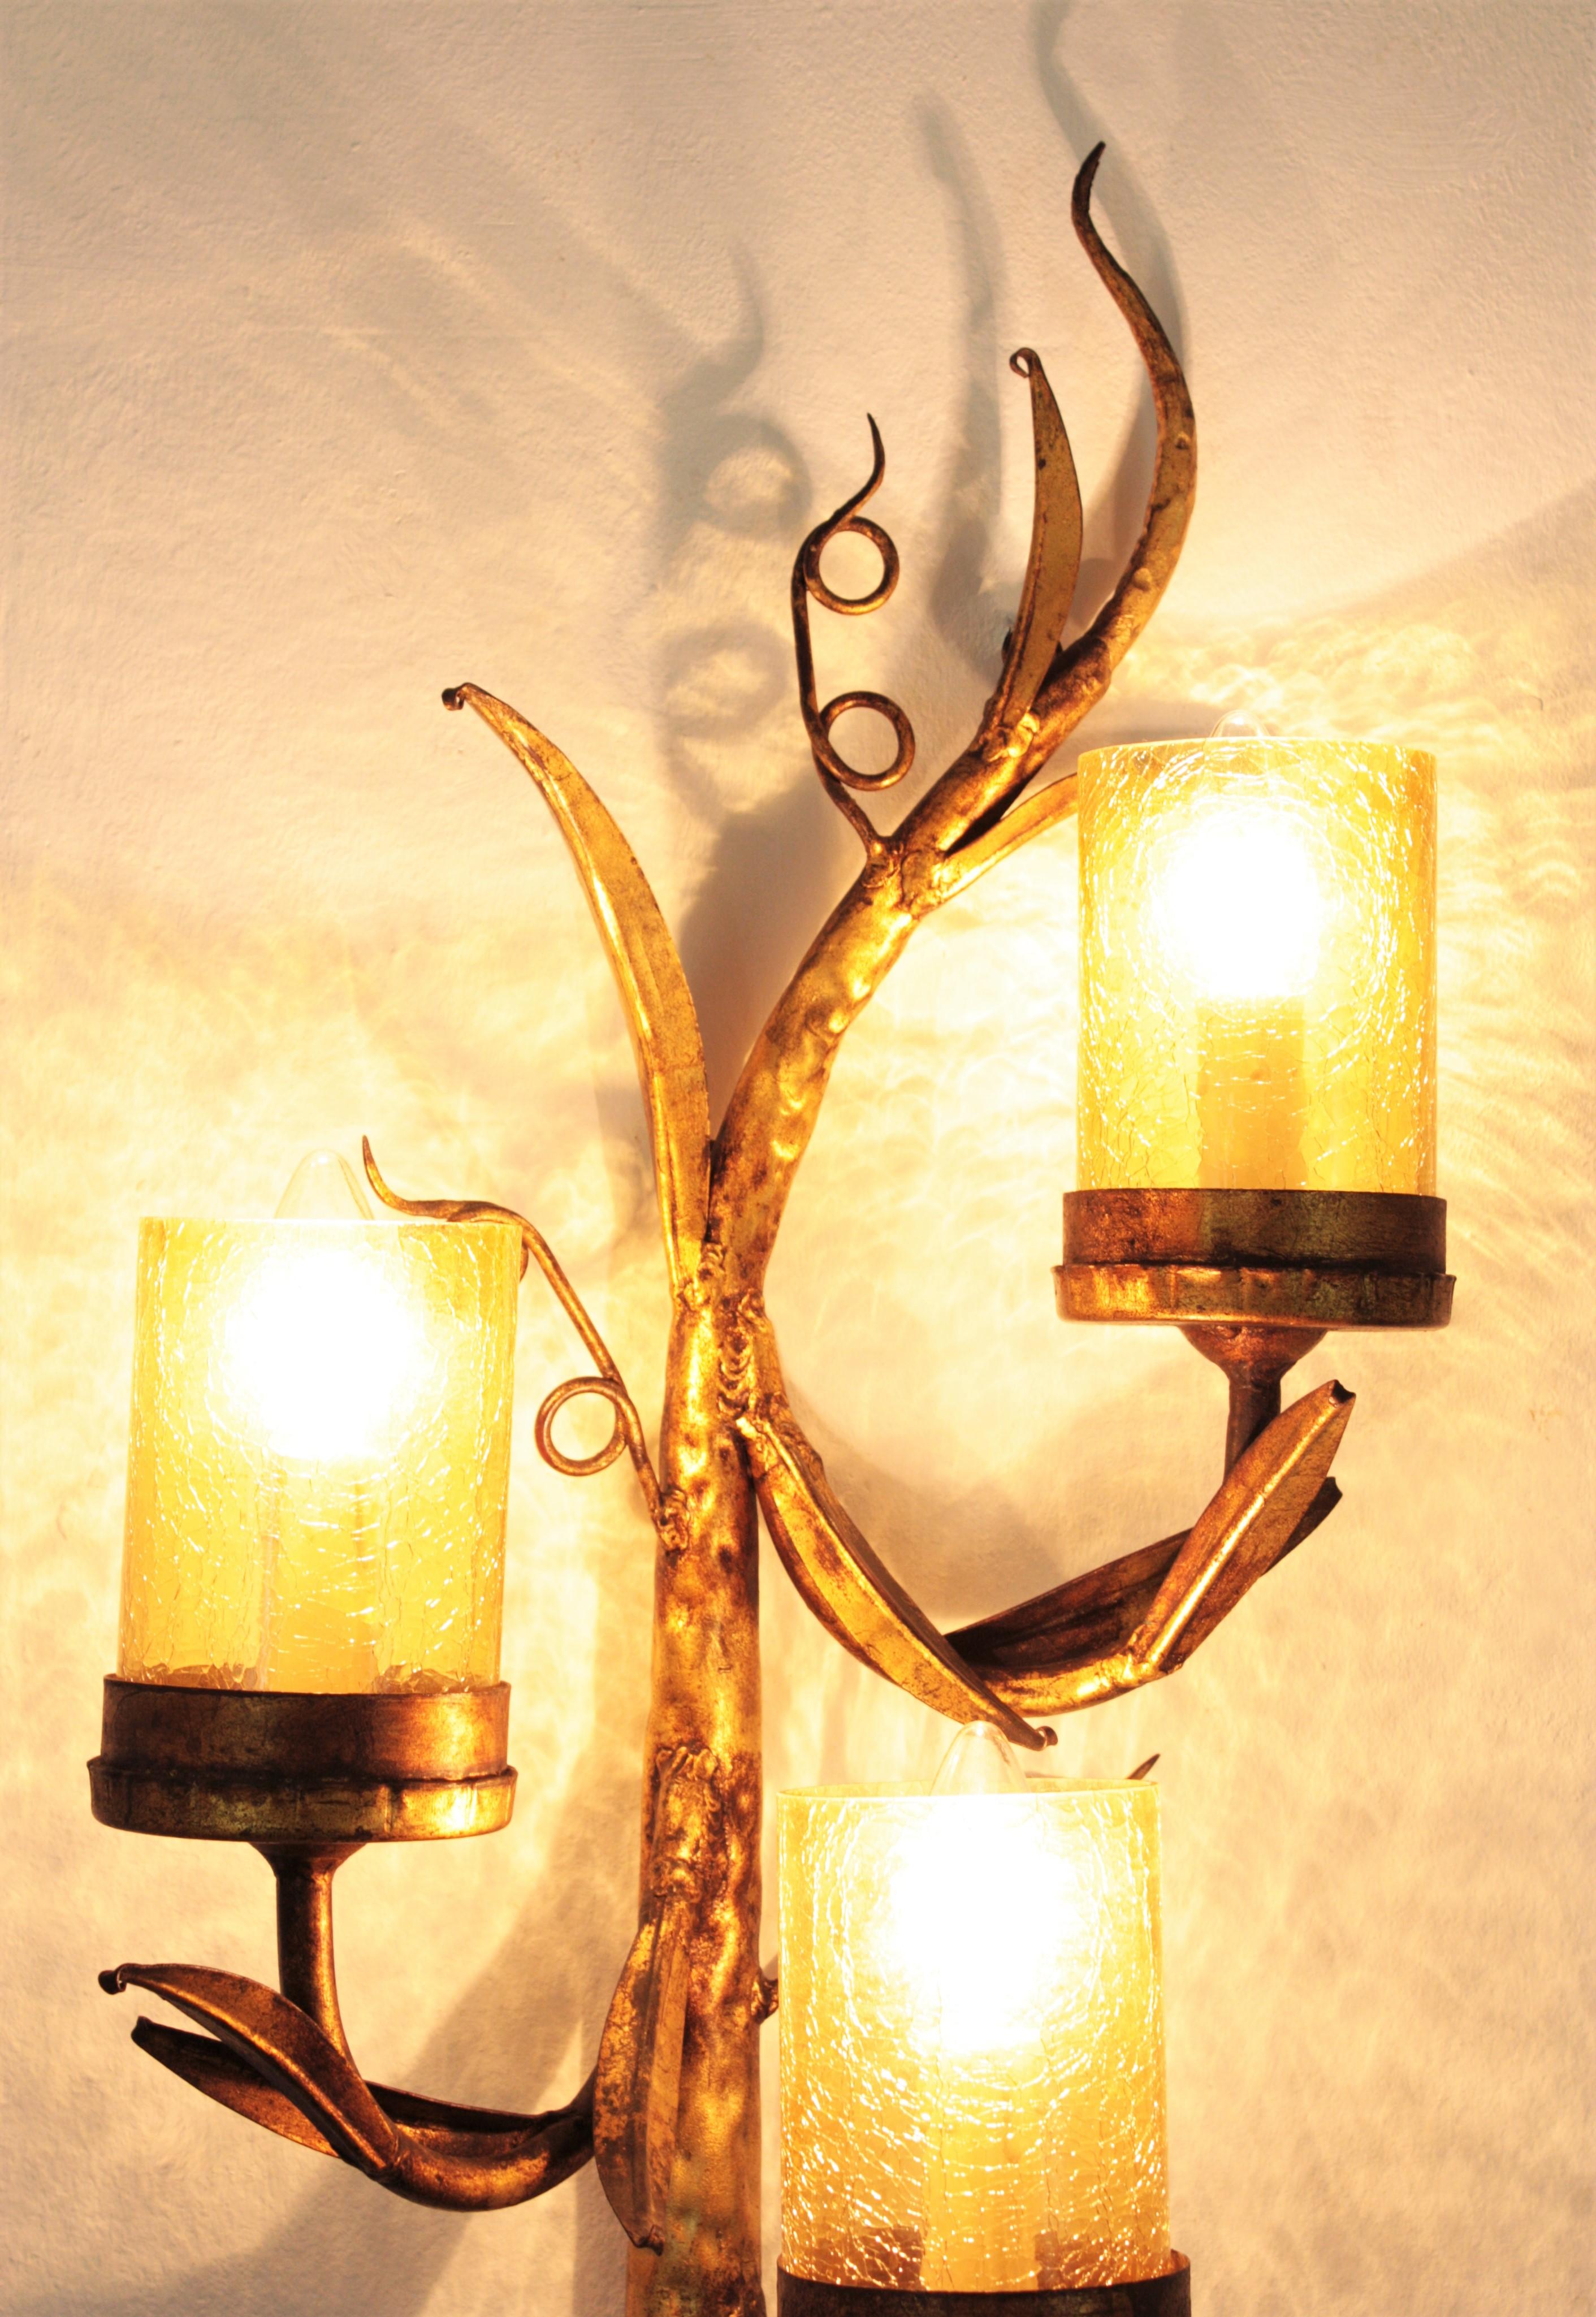 Spanish Branch Wall Sconce in Gilt Iron and Amber Cracked Glass, 1950s For Sale 7